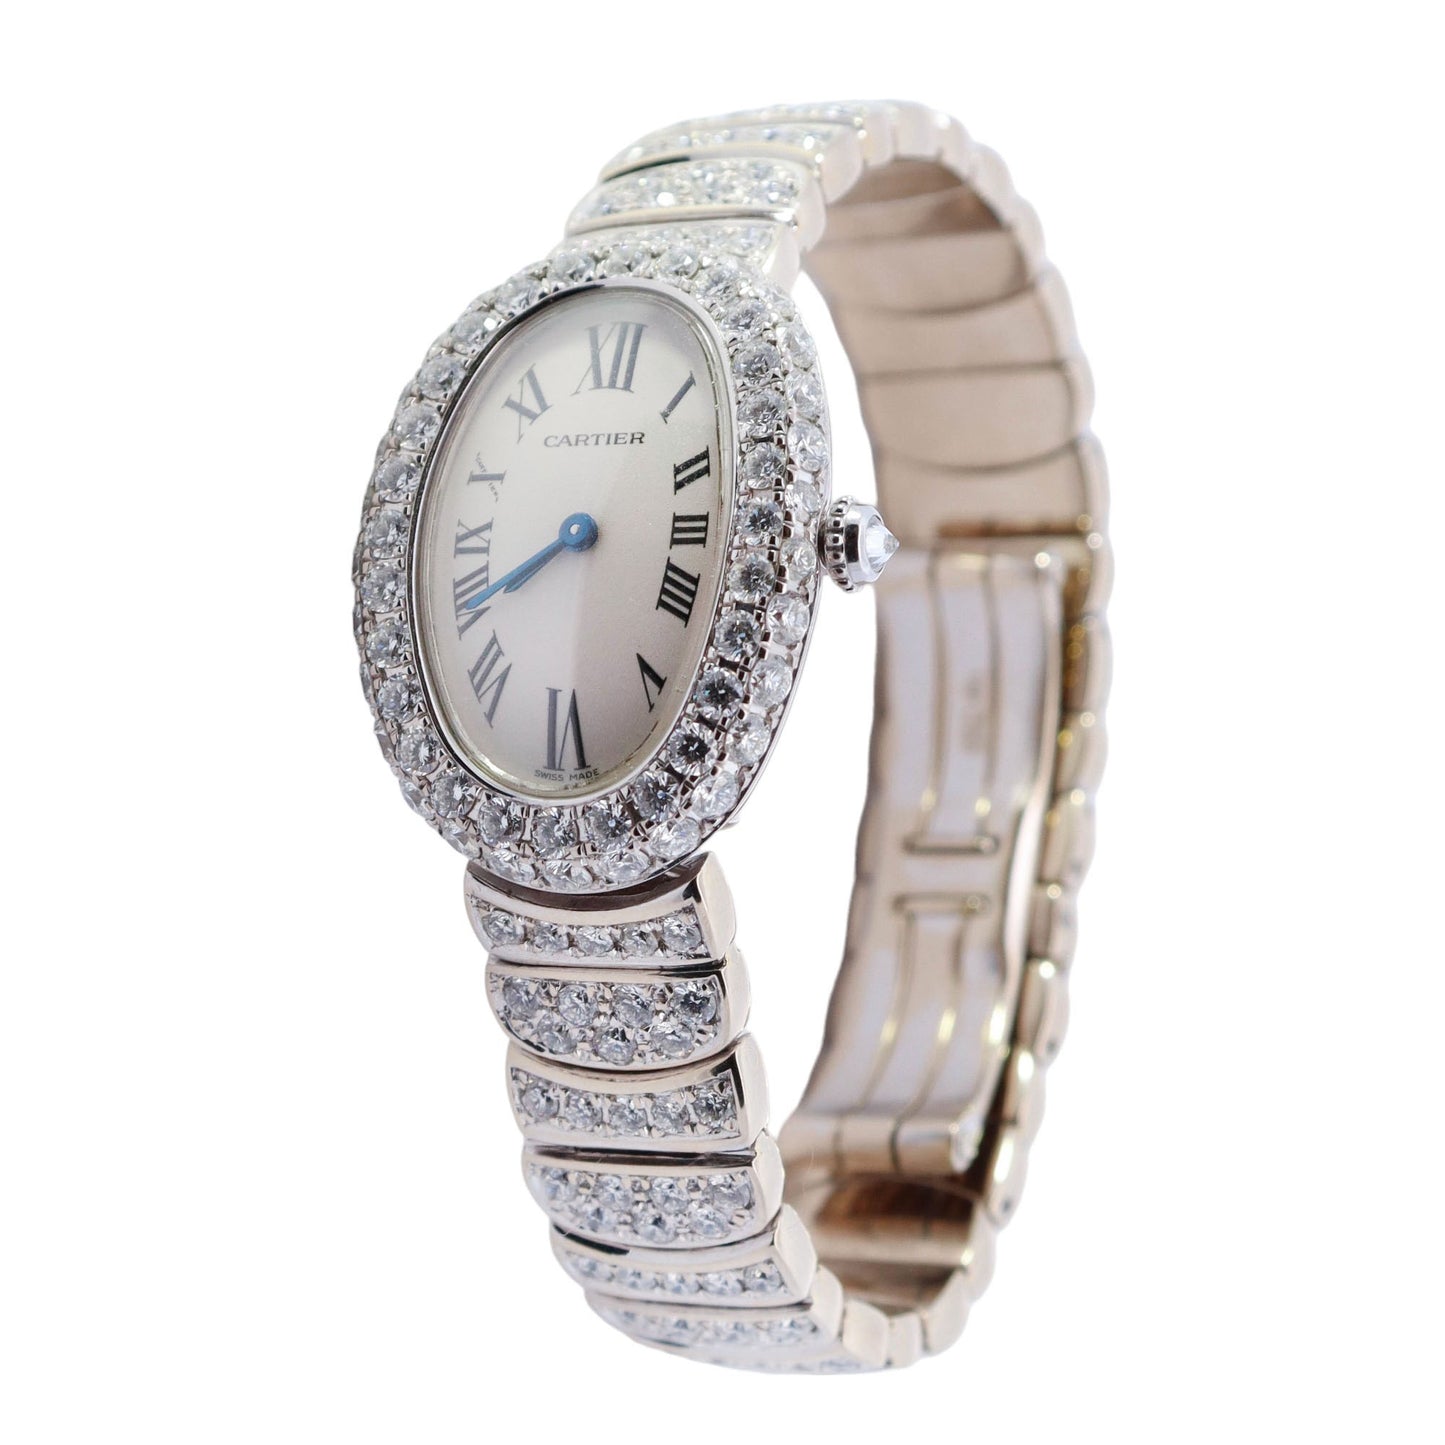 Cartier Baignoire White Gold 26mm White Roman Dial Watch Reference# 1955 - Happy Jewelers Fine Jewelry Lifetime Warranty